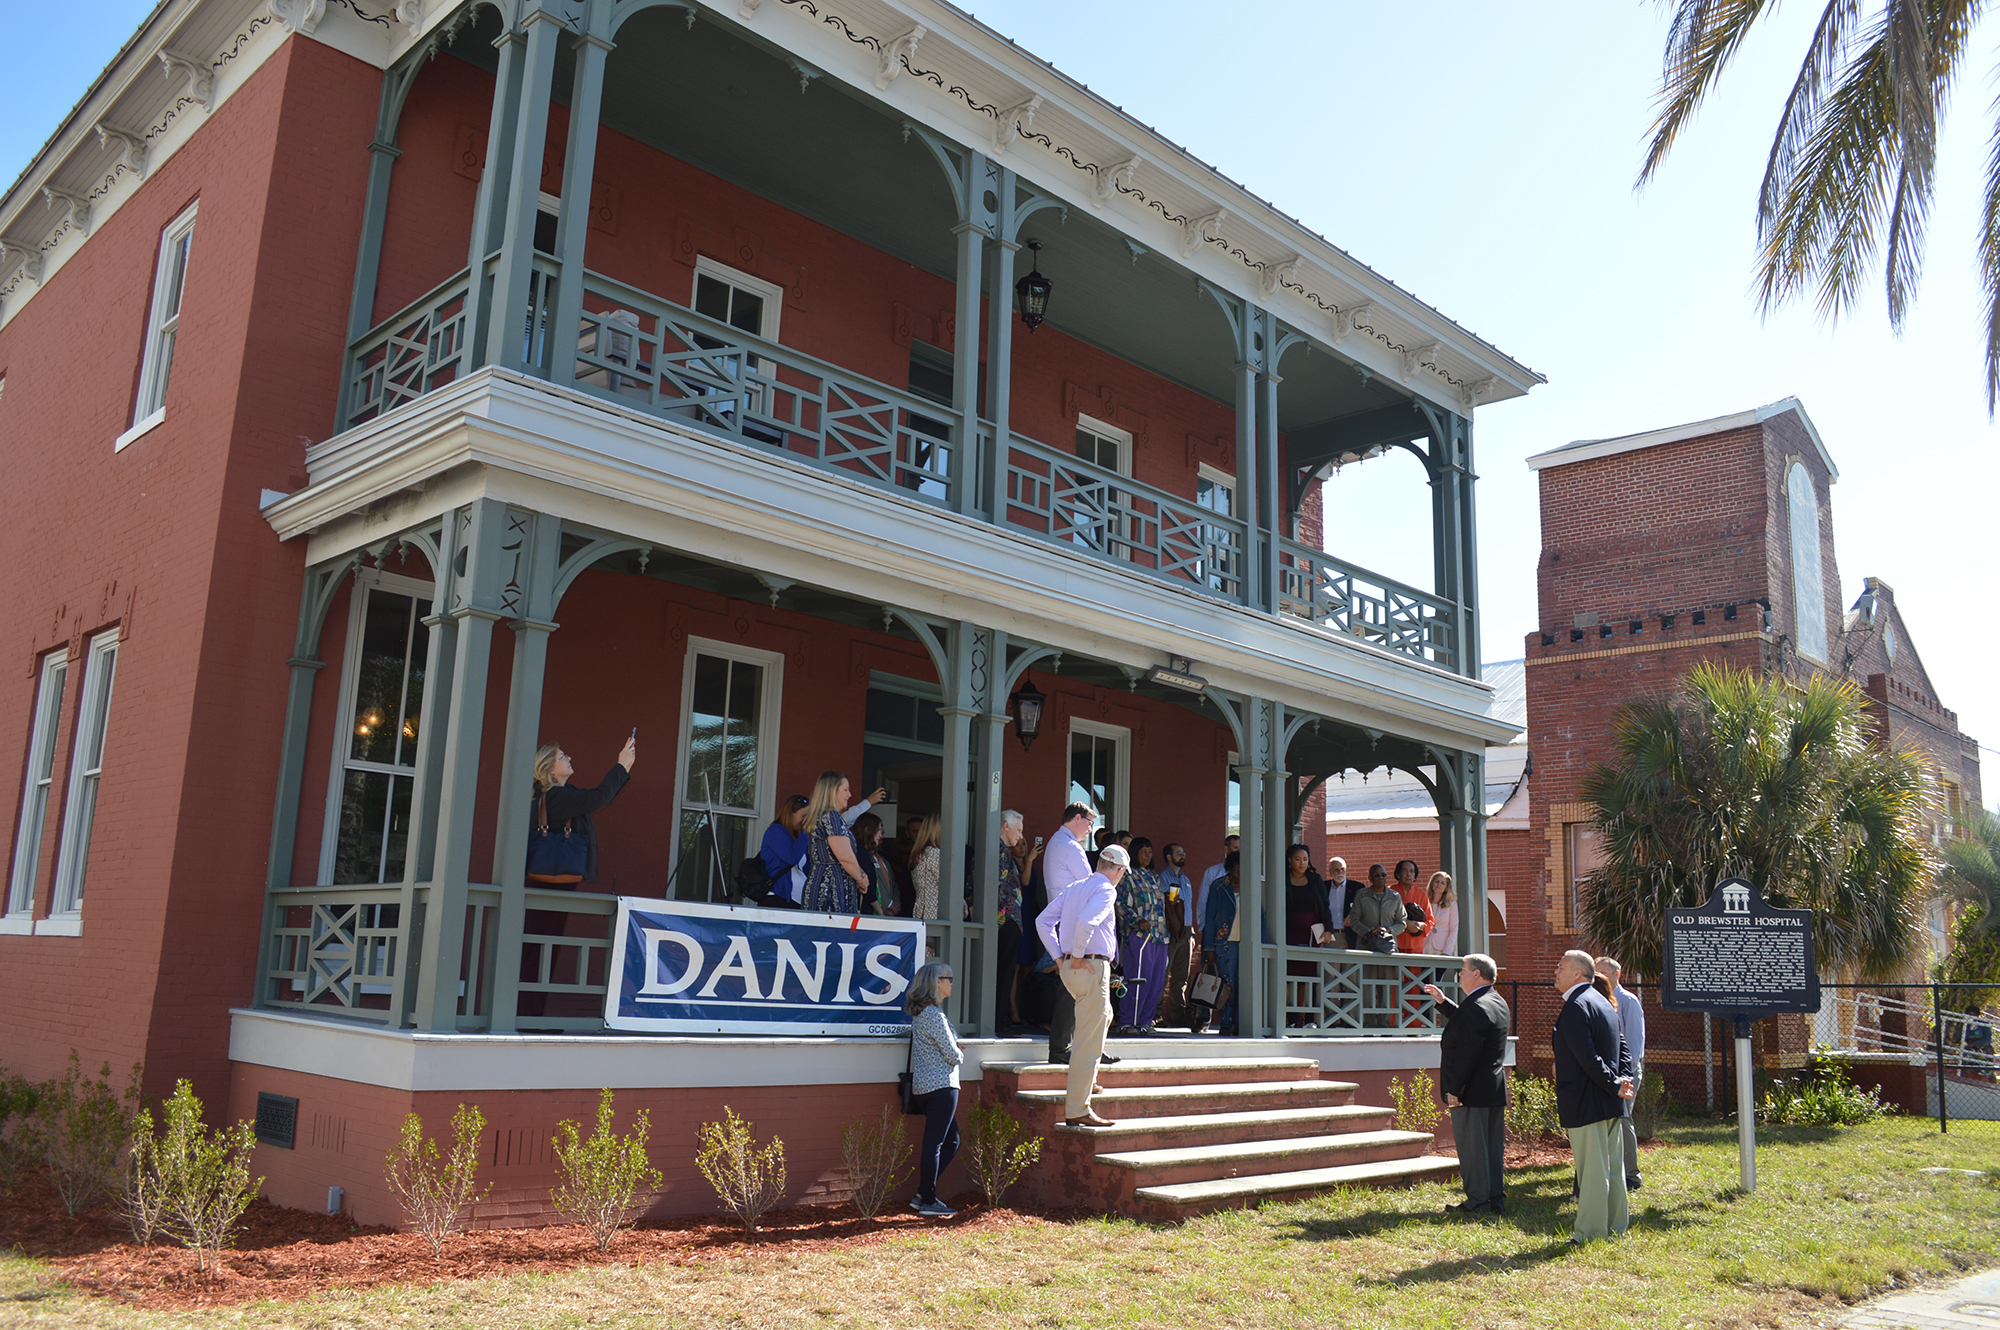 The restored Brewster Hospital building at 915 W. Monroe St. celebrated with a ribbon-cutting in April. The building was renovated by Danis Construction LLC as the headquarters for the North Florida Land Trust.